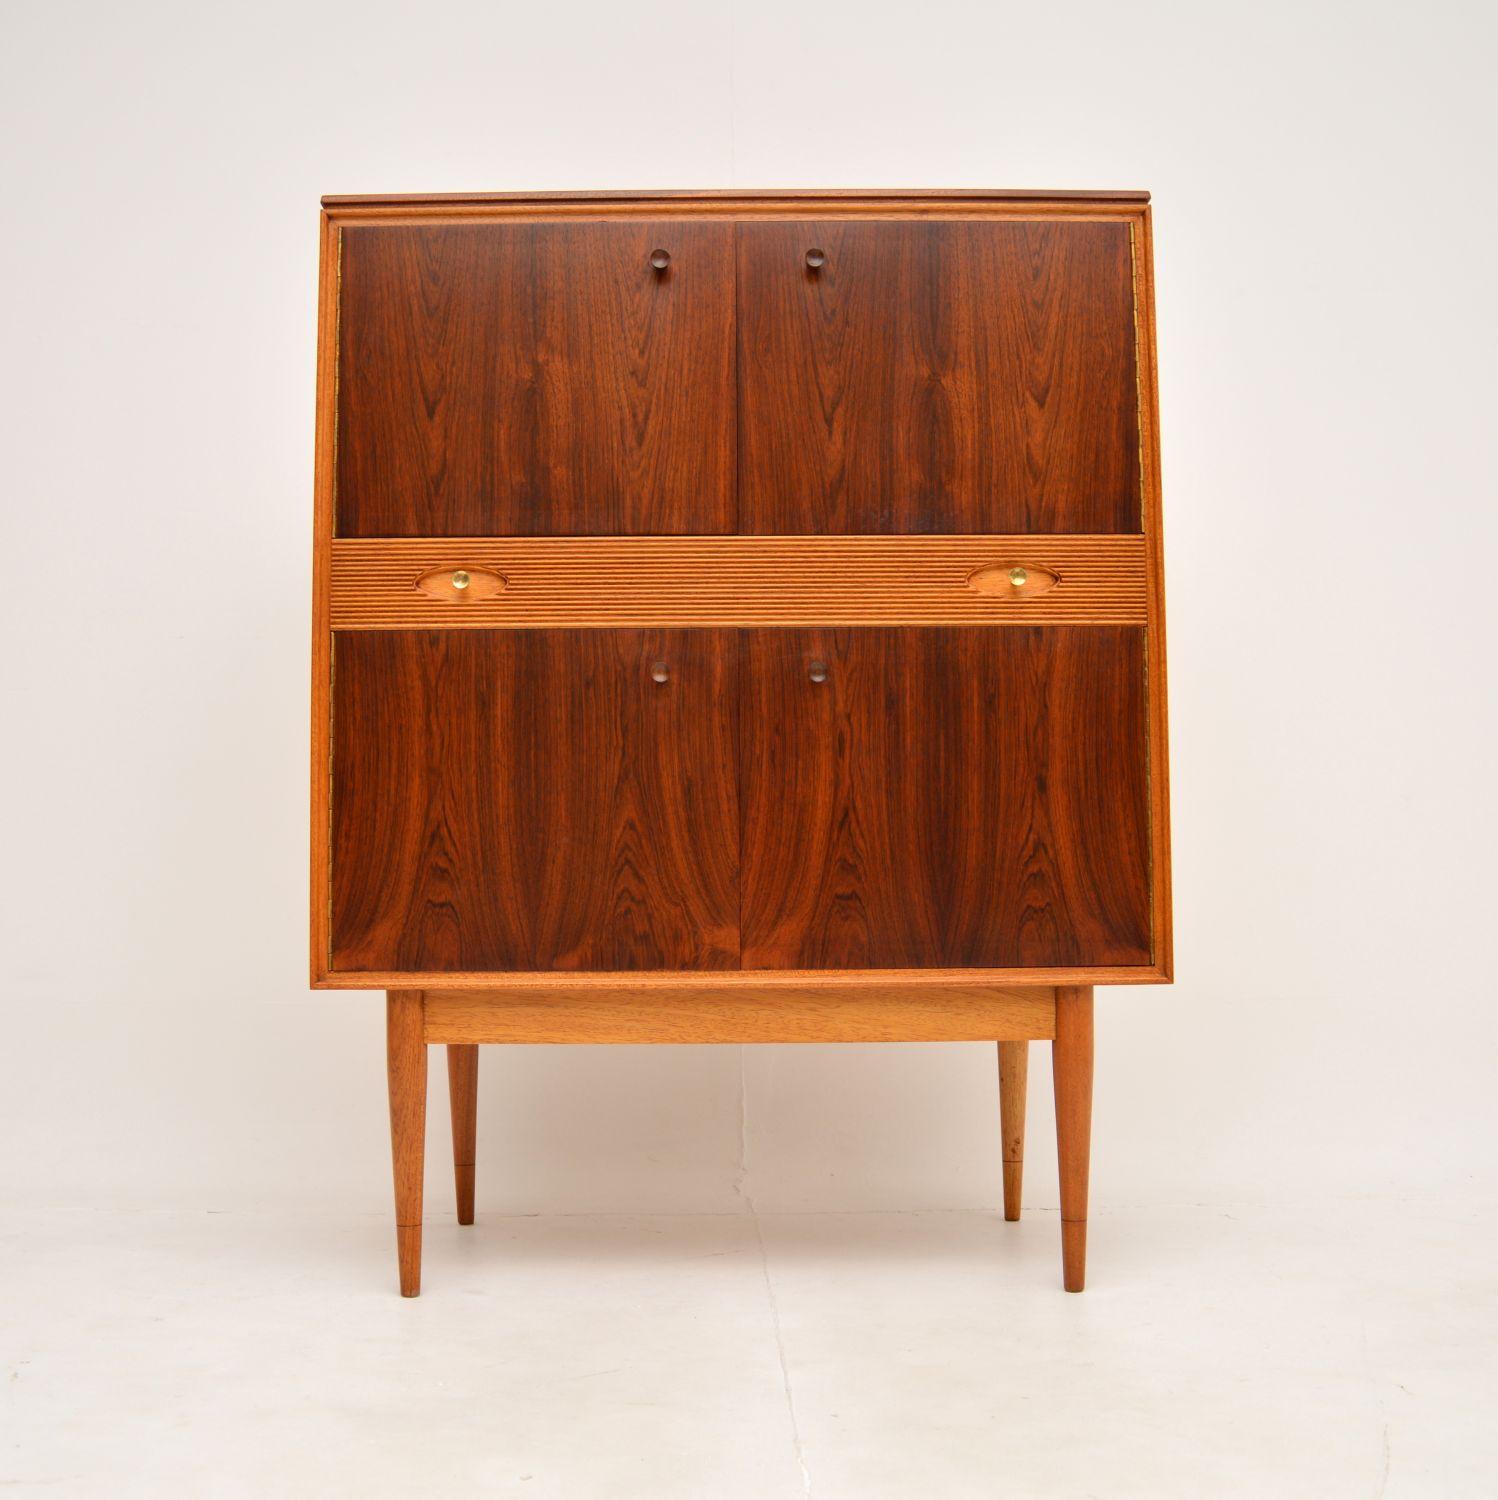 A stunning vintage drinks cabinet by Robert Heritage for Archie Shine. This is part of the award winning Hamilton range, and it dates from the 1960’s.

The doors have gorgeous grain patterns and a beautiful colour. The drawers and carcass are in a